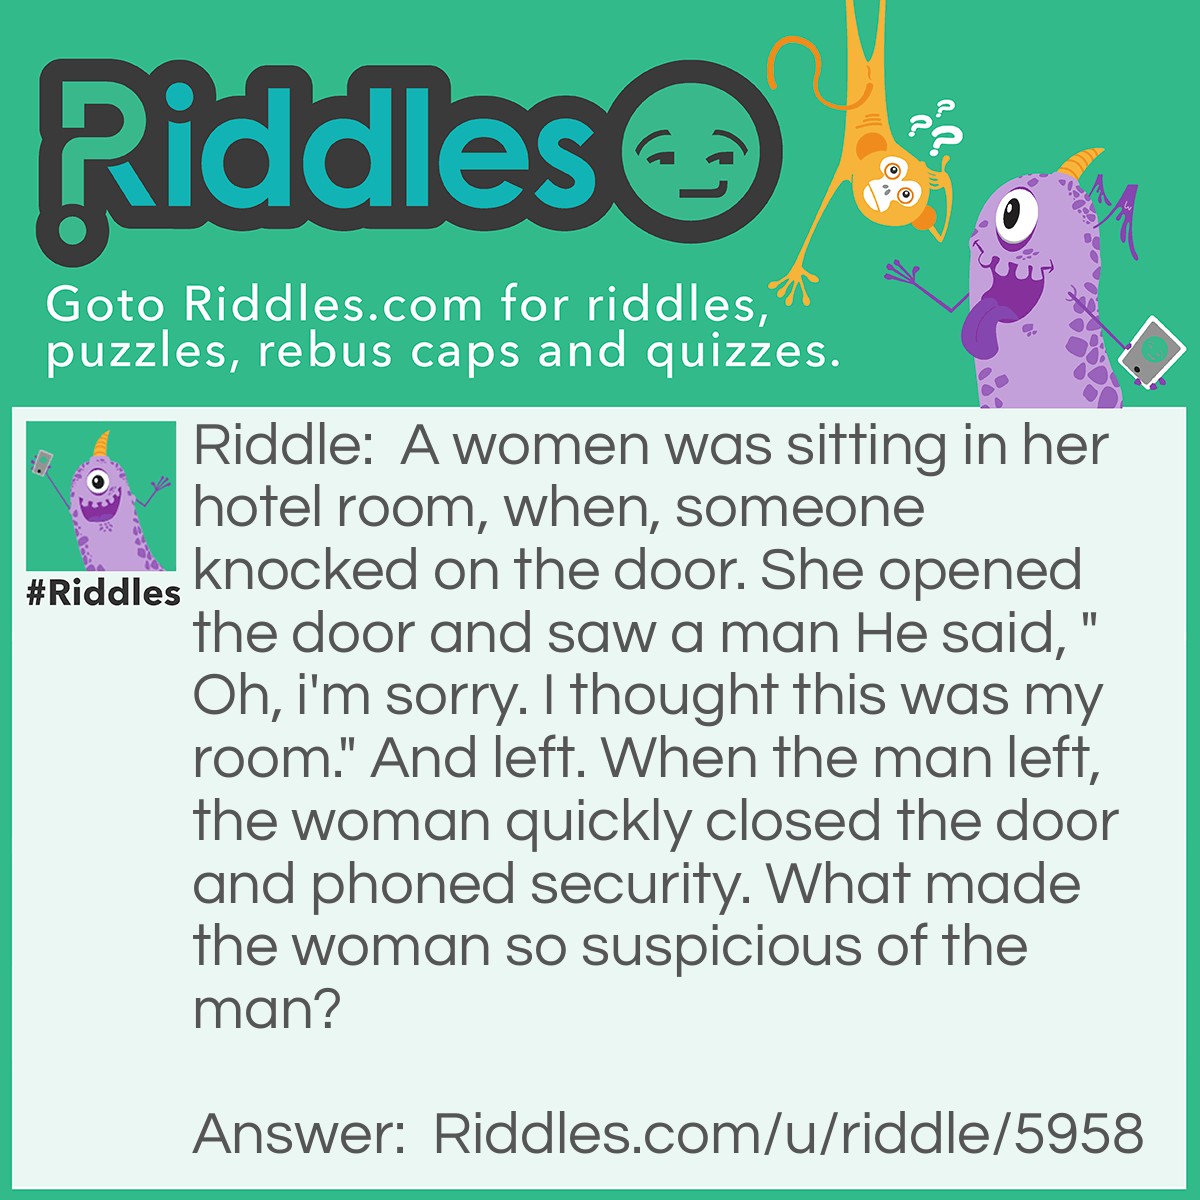 Riddle: A women was sitting in her hotel room, when, someone knocked on the door. She opened the door and saw a man He said, "Oh, i'm sorry. I thought this was my room." And left. When the man left, the woman quickly closed the door and phoned security. What made the woman so suspicious of the man? Answer: You don't knock on your own hotel door!